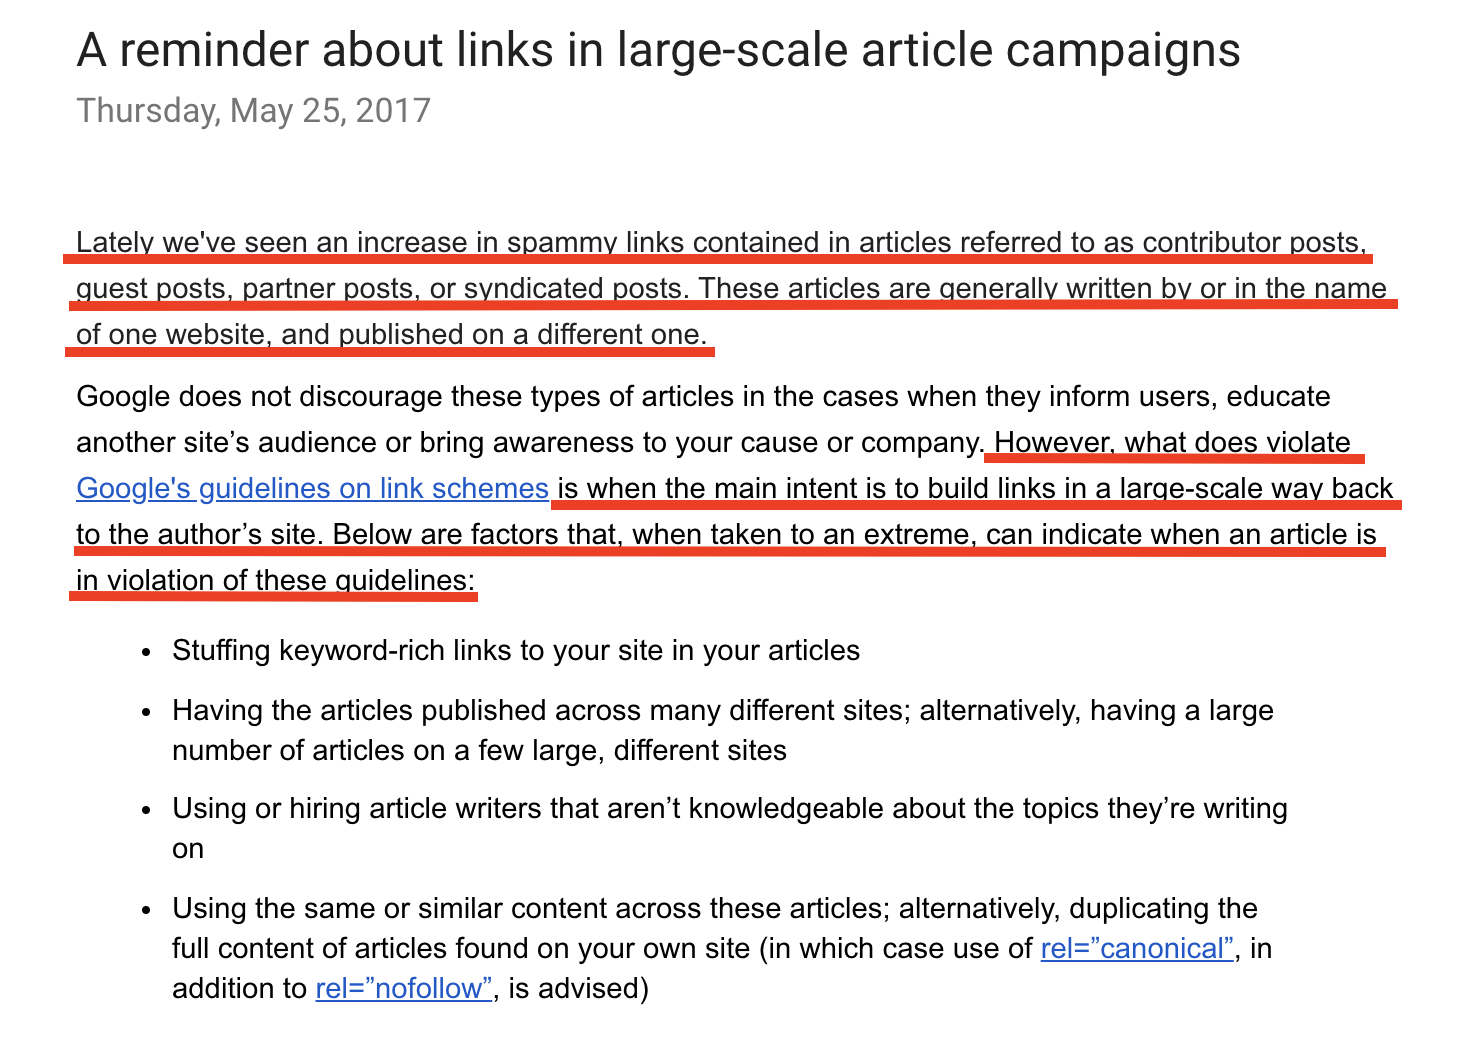 google on large-scale article campaigns